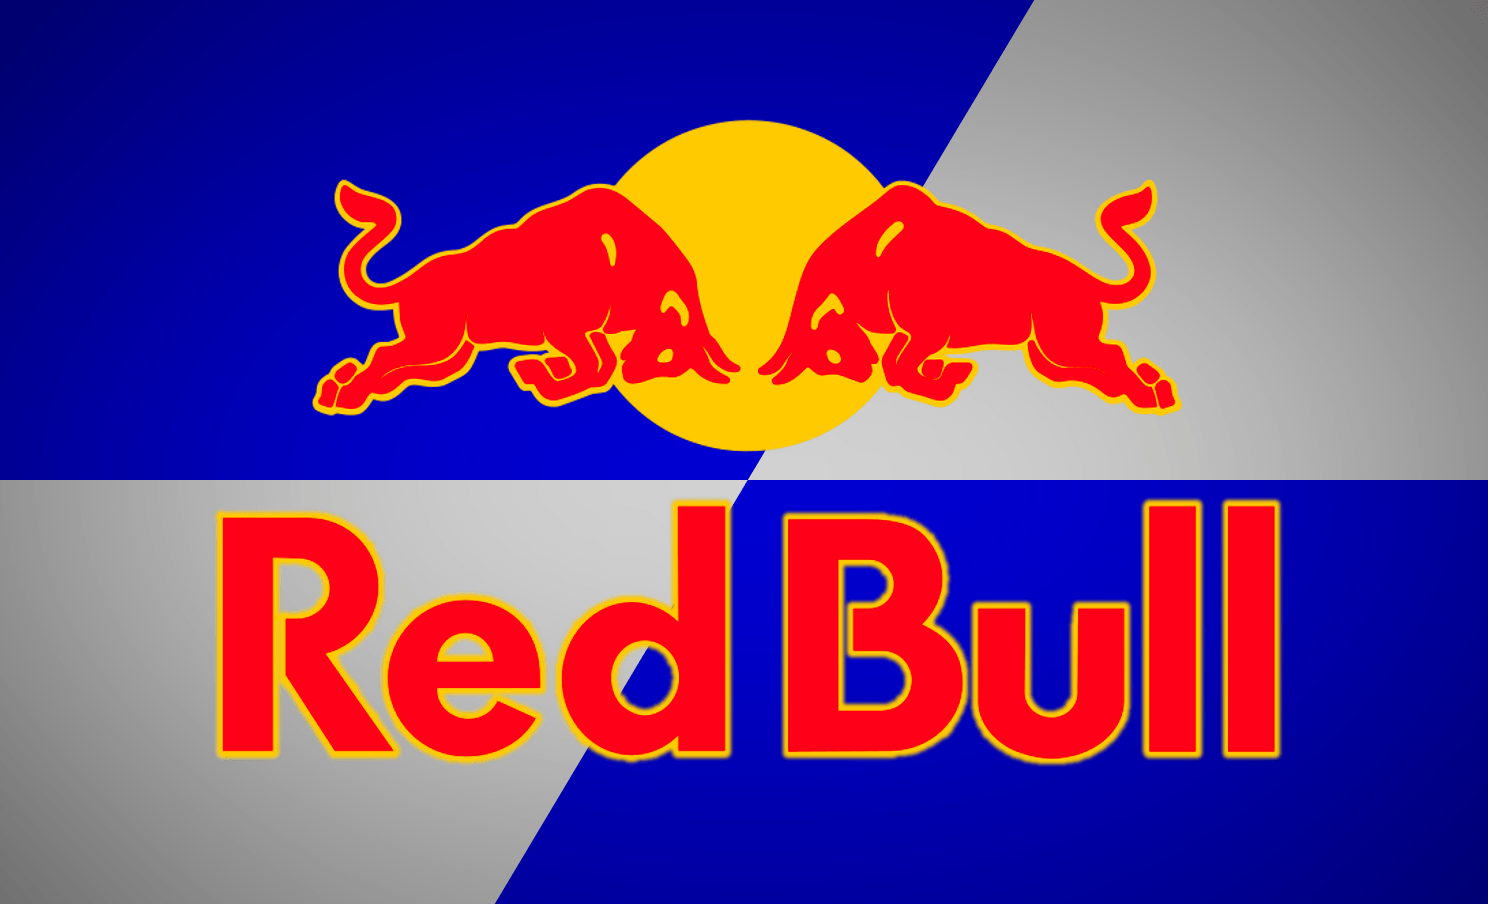 Red Drink Logo - Red Bull Logo, Red Bull Symbol, Meaning, History and Evolution